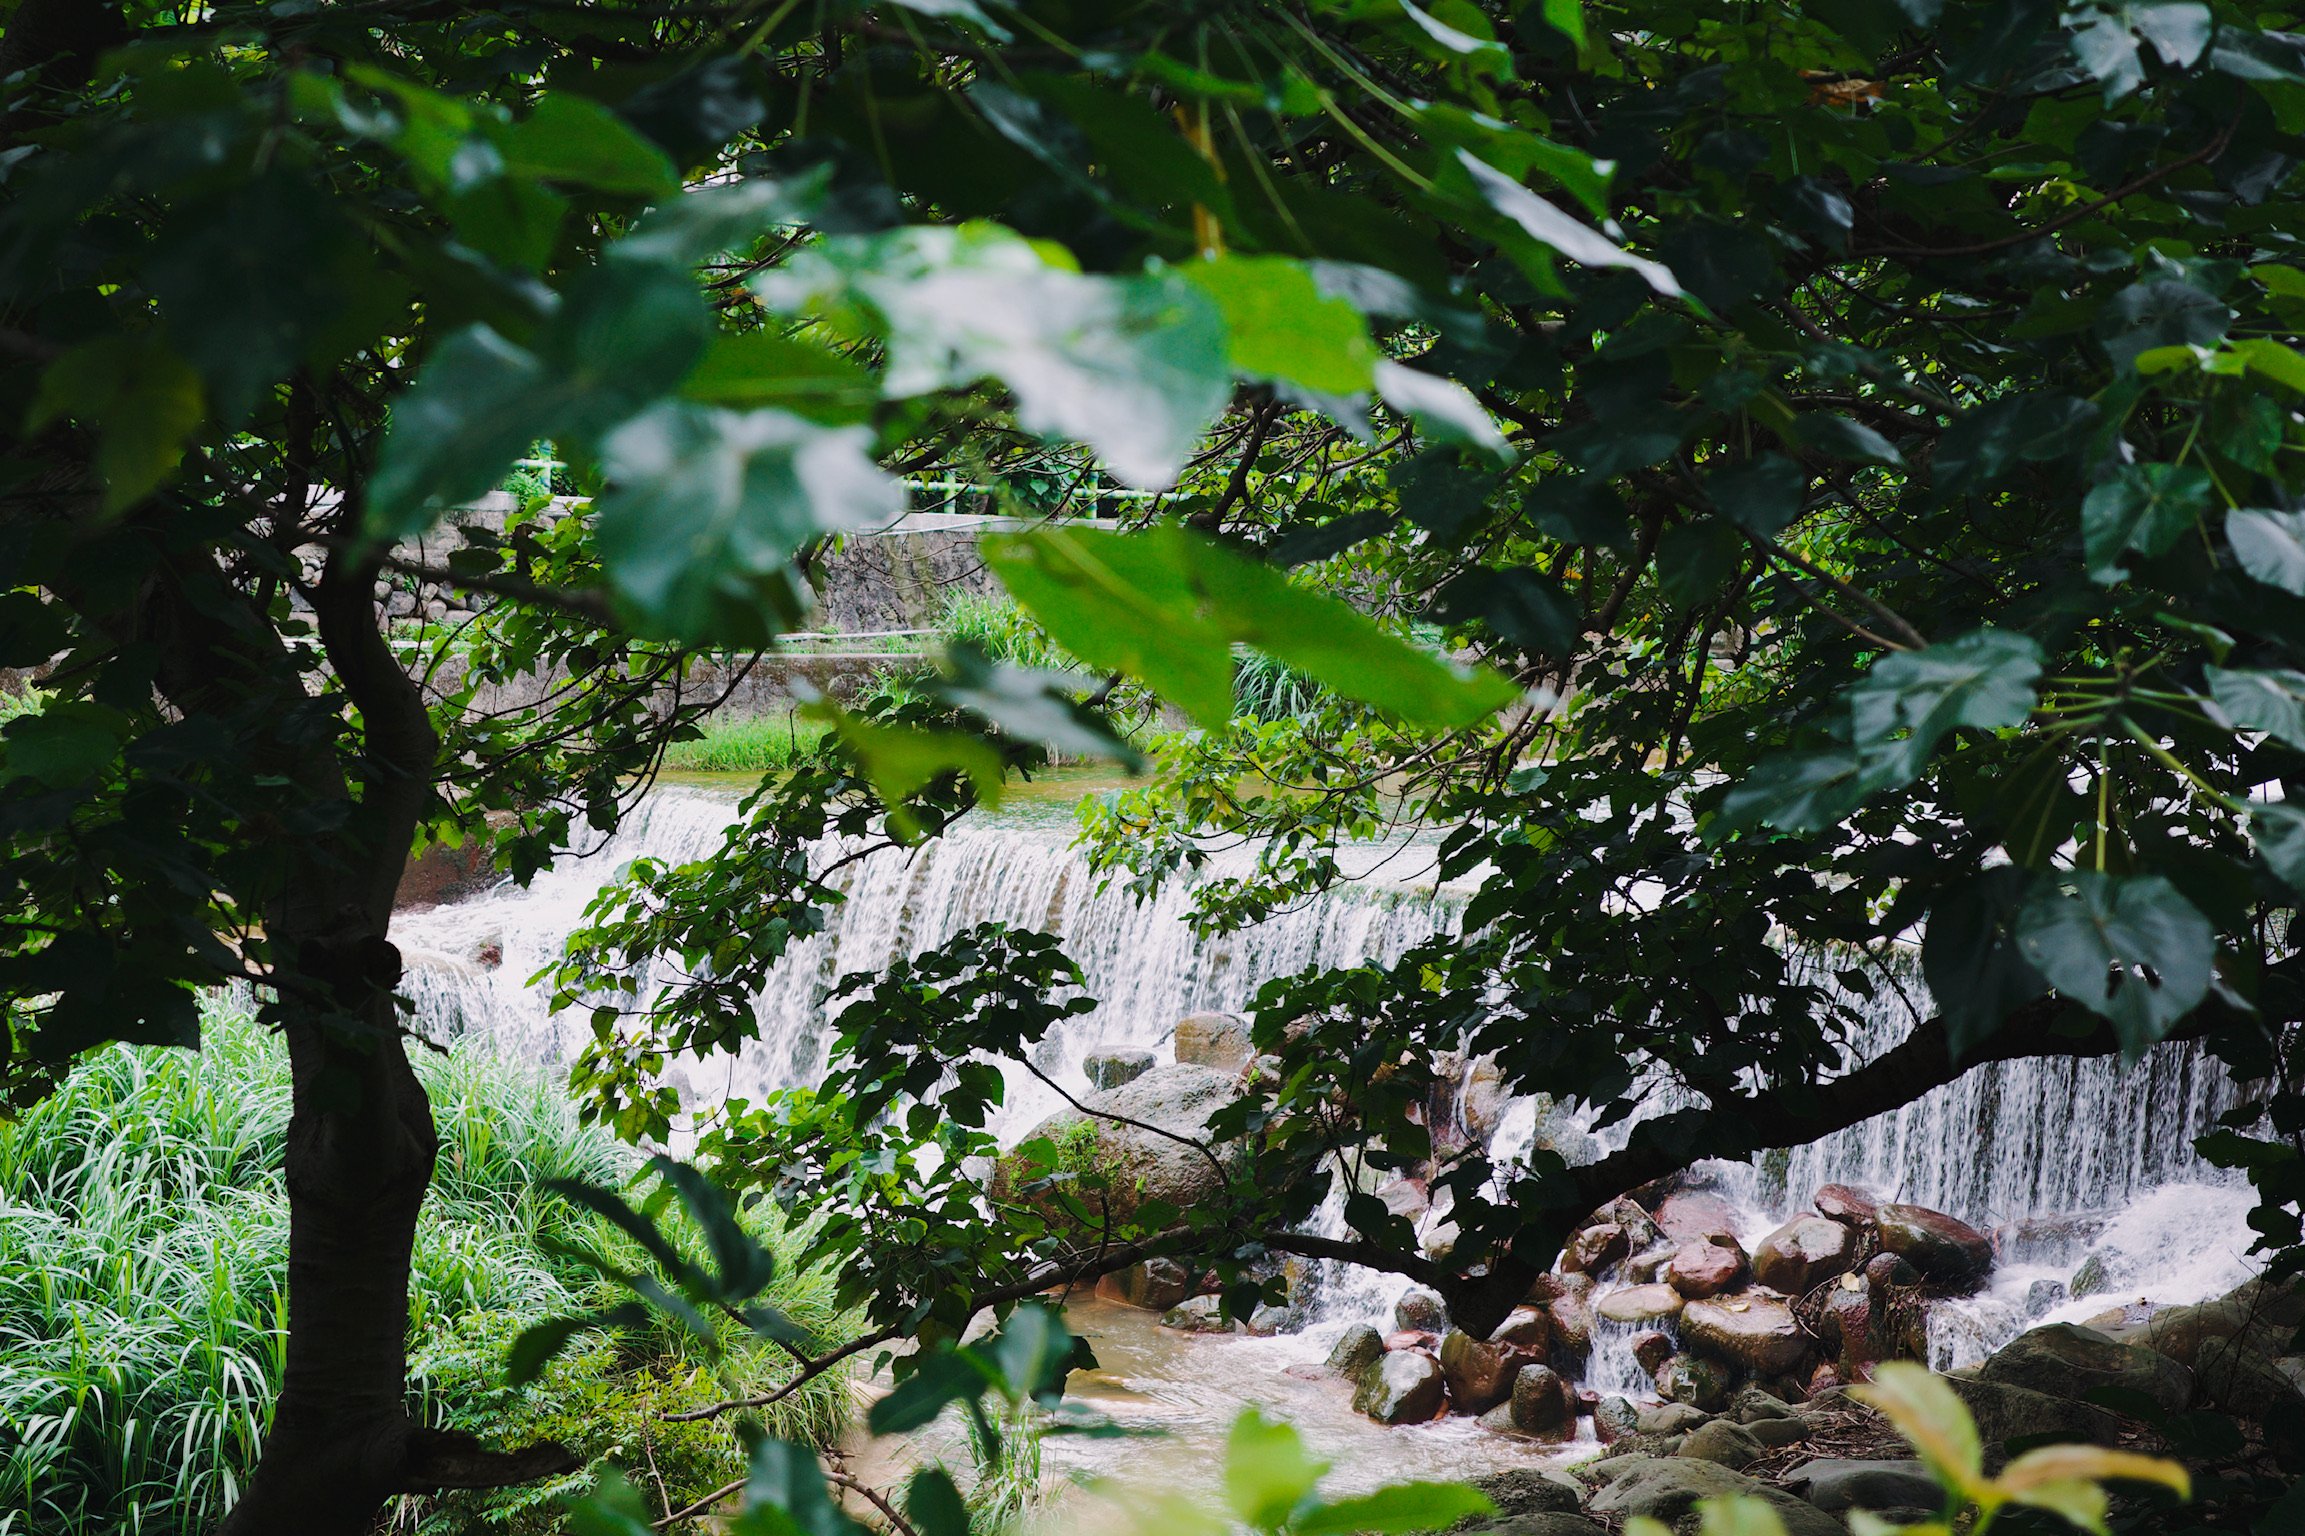 A small waterfall in focus in the background, blurred lush greeneries in the foreground.